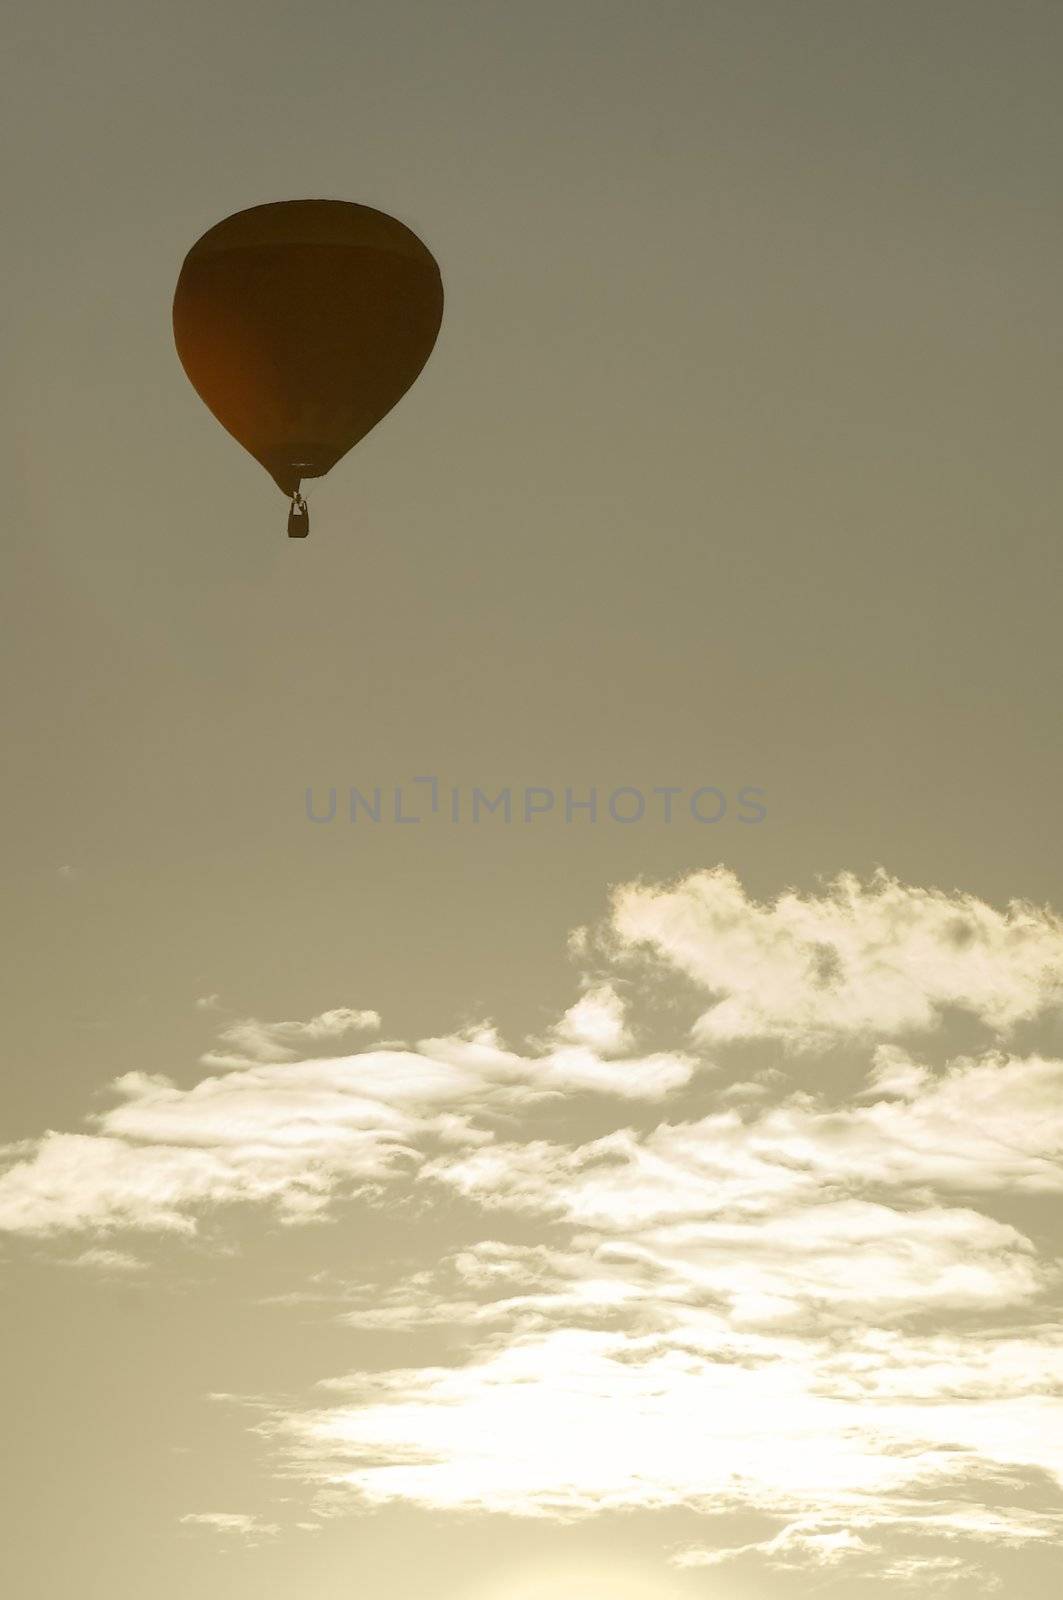 baloon in the sky by rorem